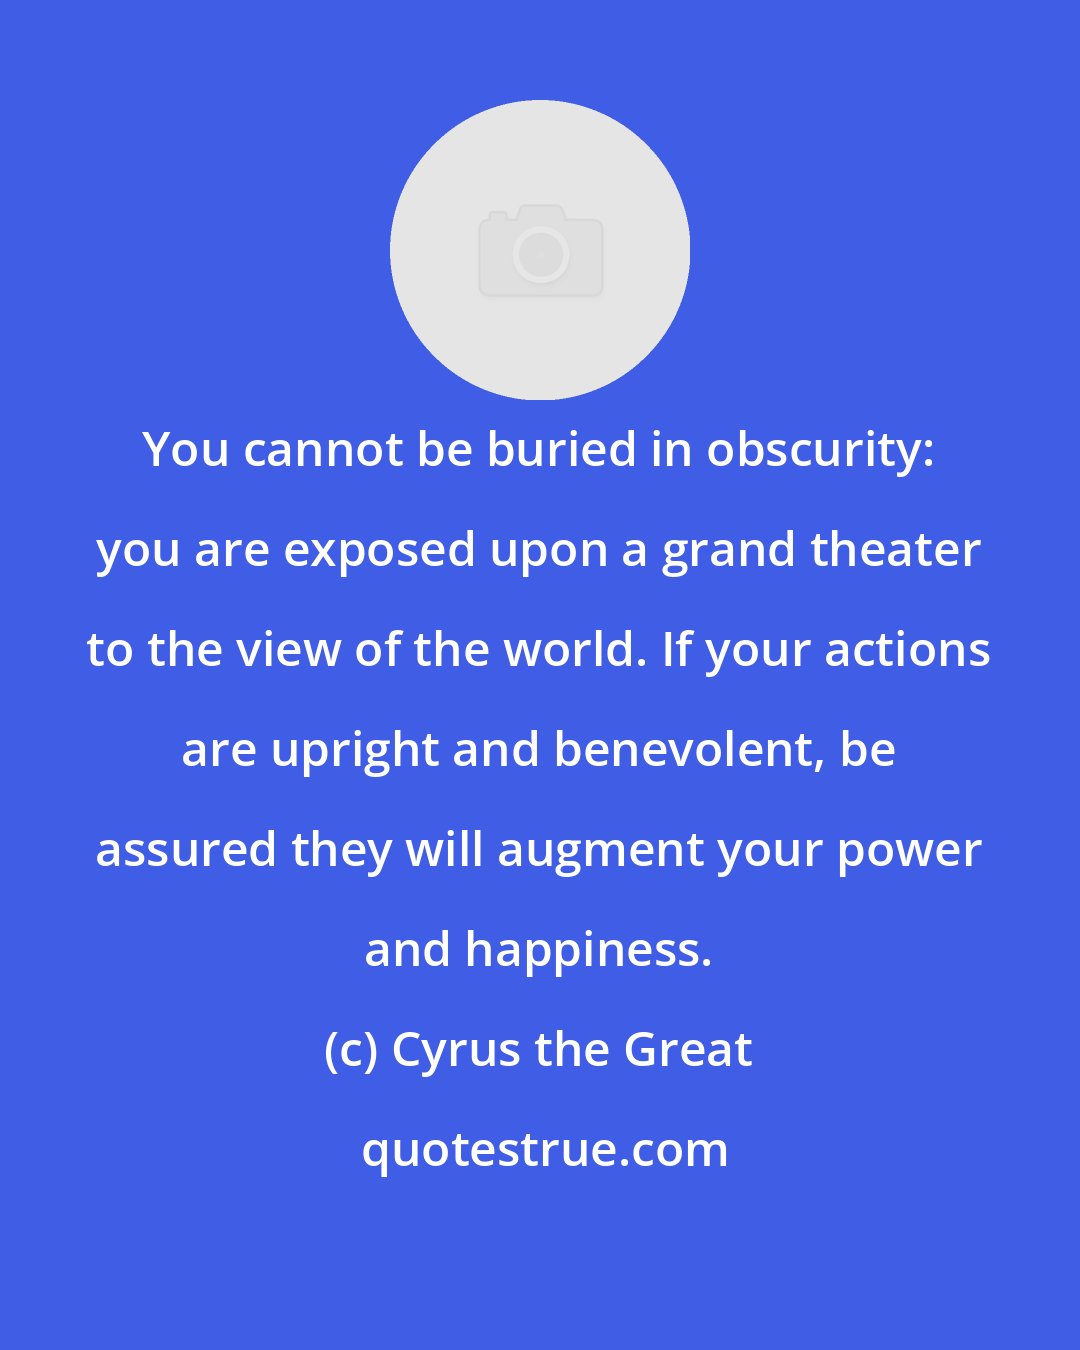 Cyrus the Great: You cannot be buried in obscurity: you are exposed upon a grand theater to the view of the world. If your actions are upright and benevolent, be assured they will augment your power and happiness.